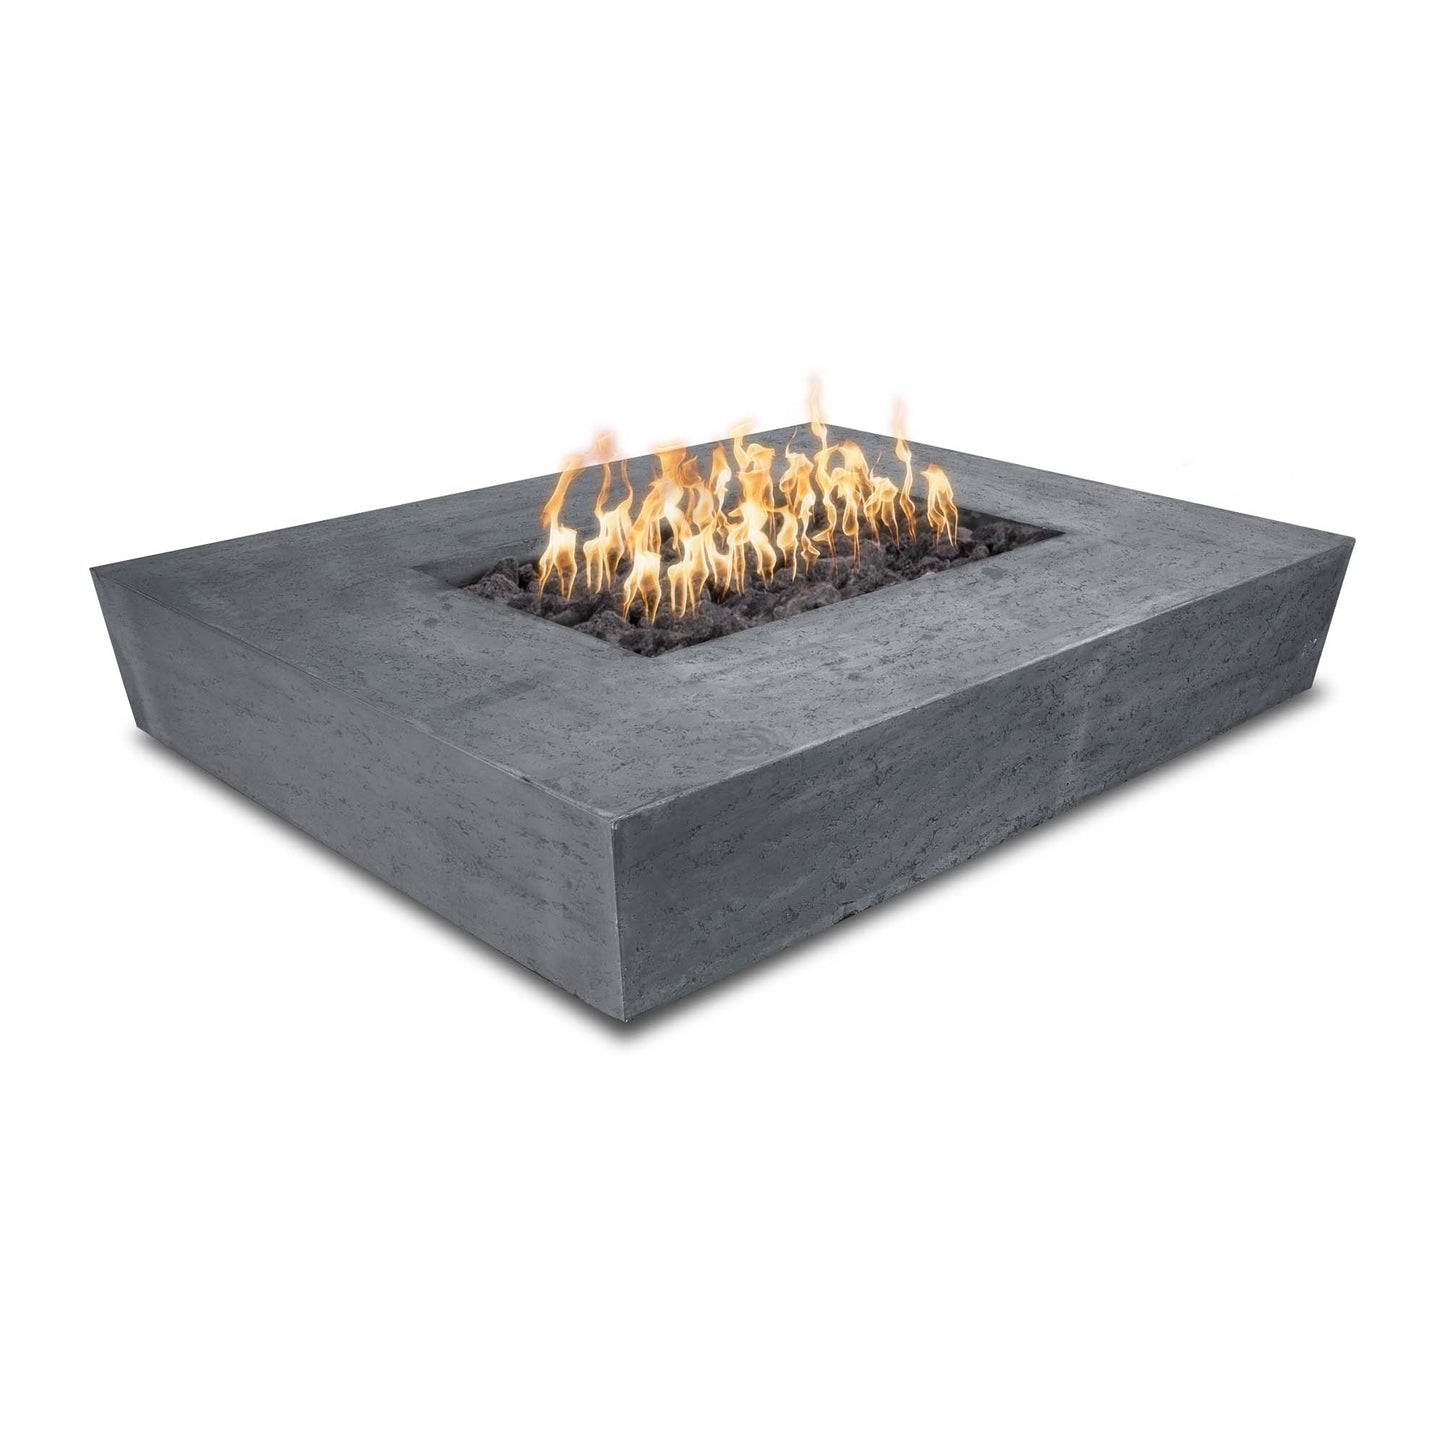 The Outdoor Plus Rectangular Heiko 58" Rustic Gray GFRC Concrete Liquid Propane Fire Pit with 110V Electronic Ignition